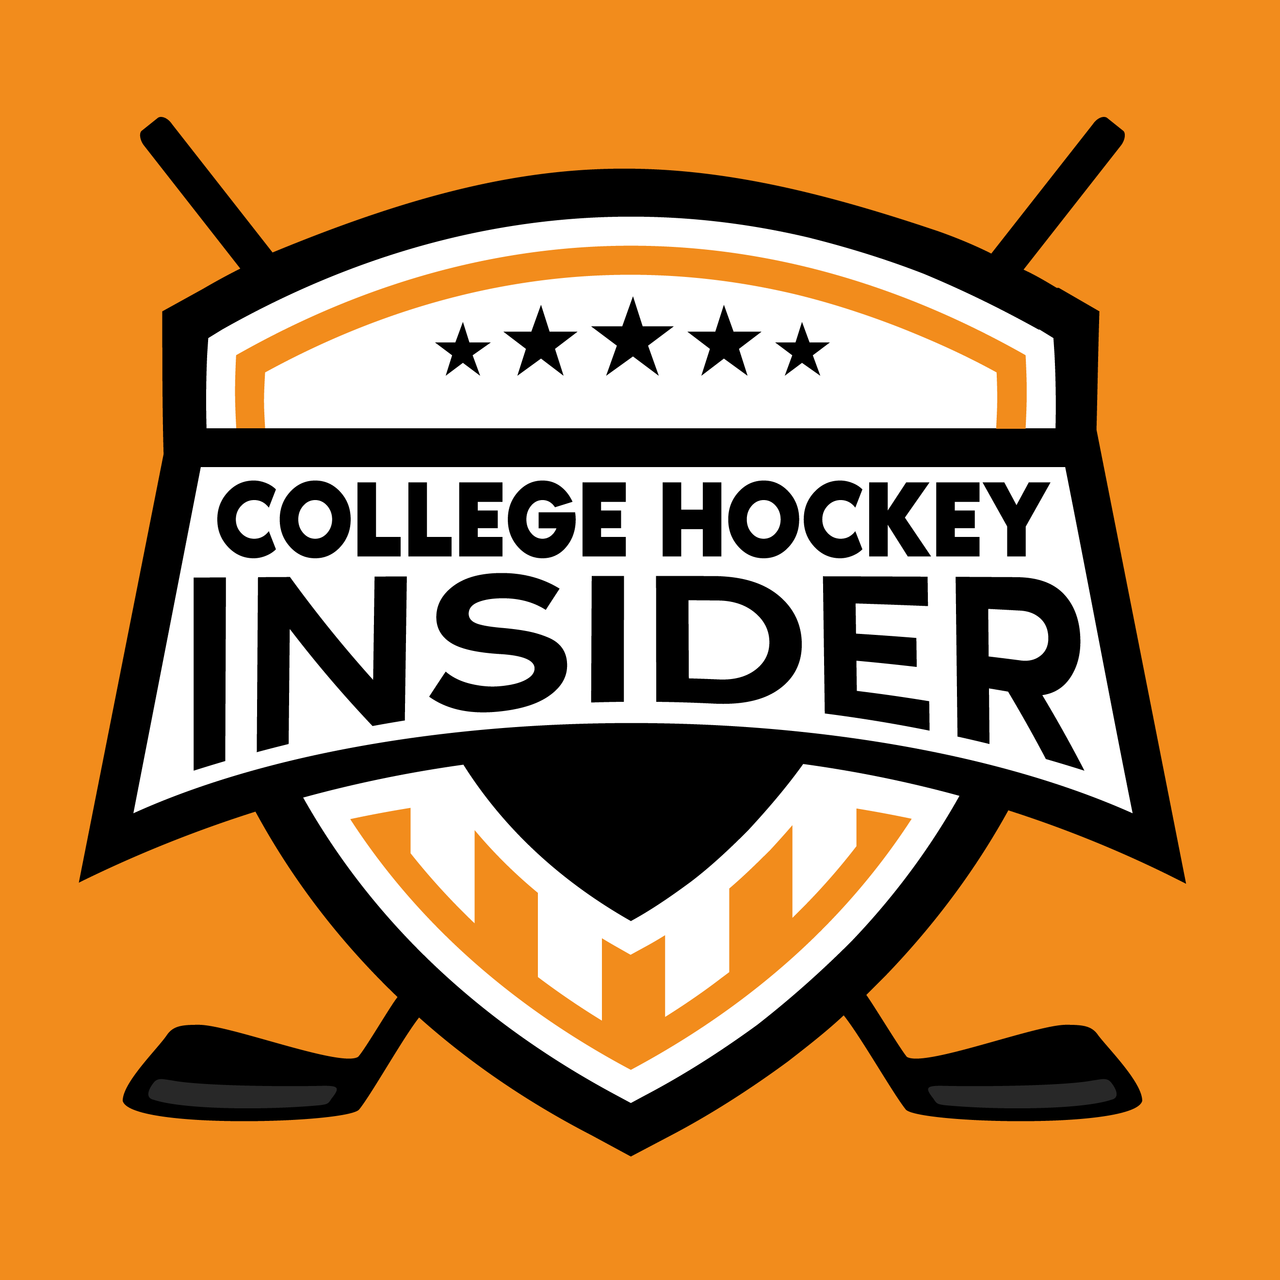 Artwork for College Hockey Insider by Mike McMahon